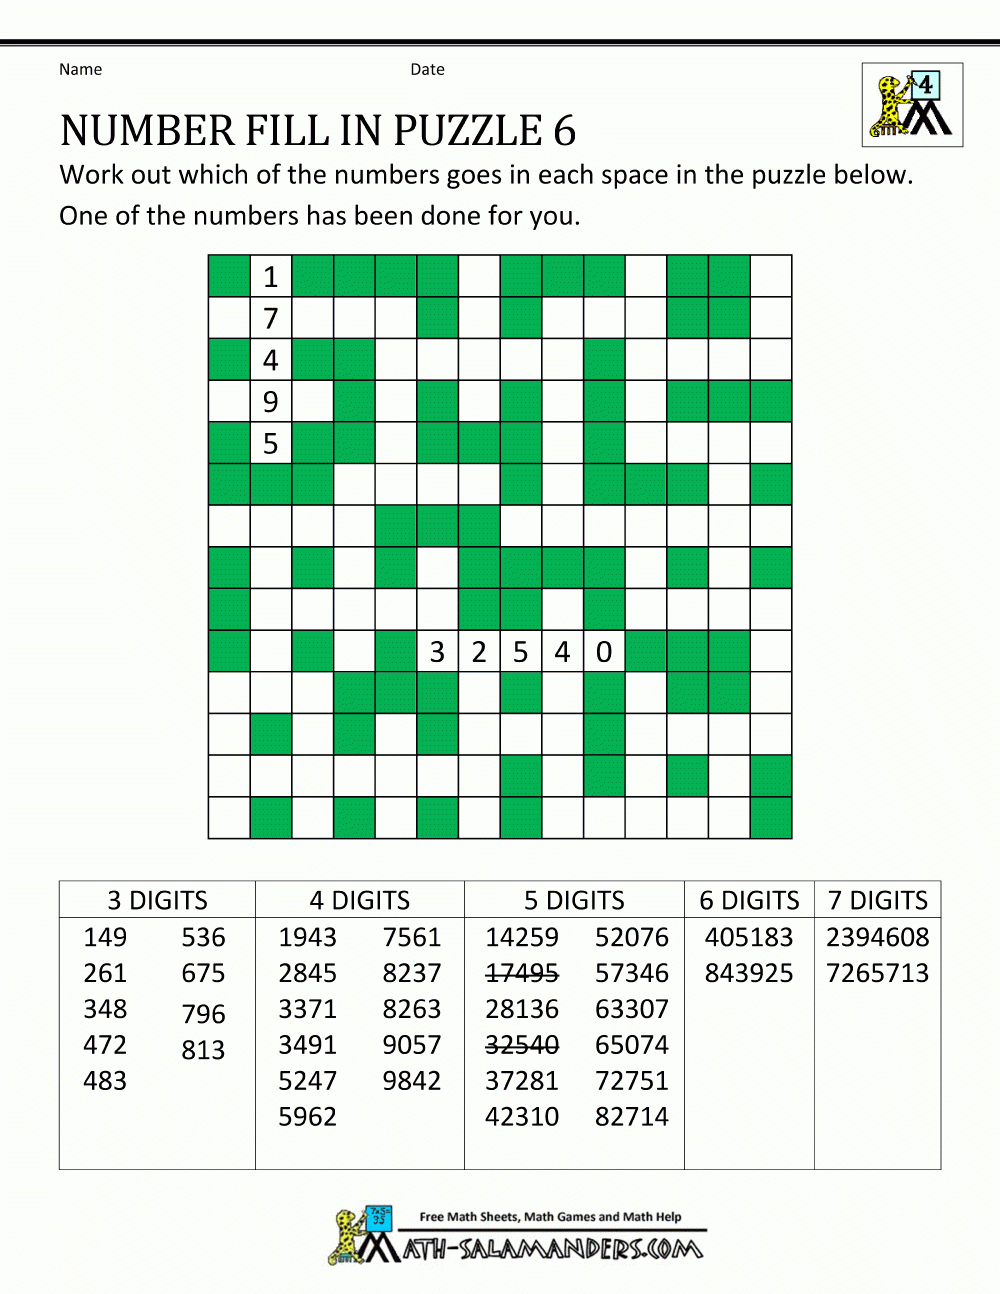 Number Fill In Puzzles Crosswords Crossword Puzzle - Printable Fill In Puzzle